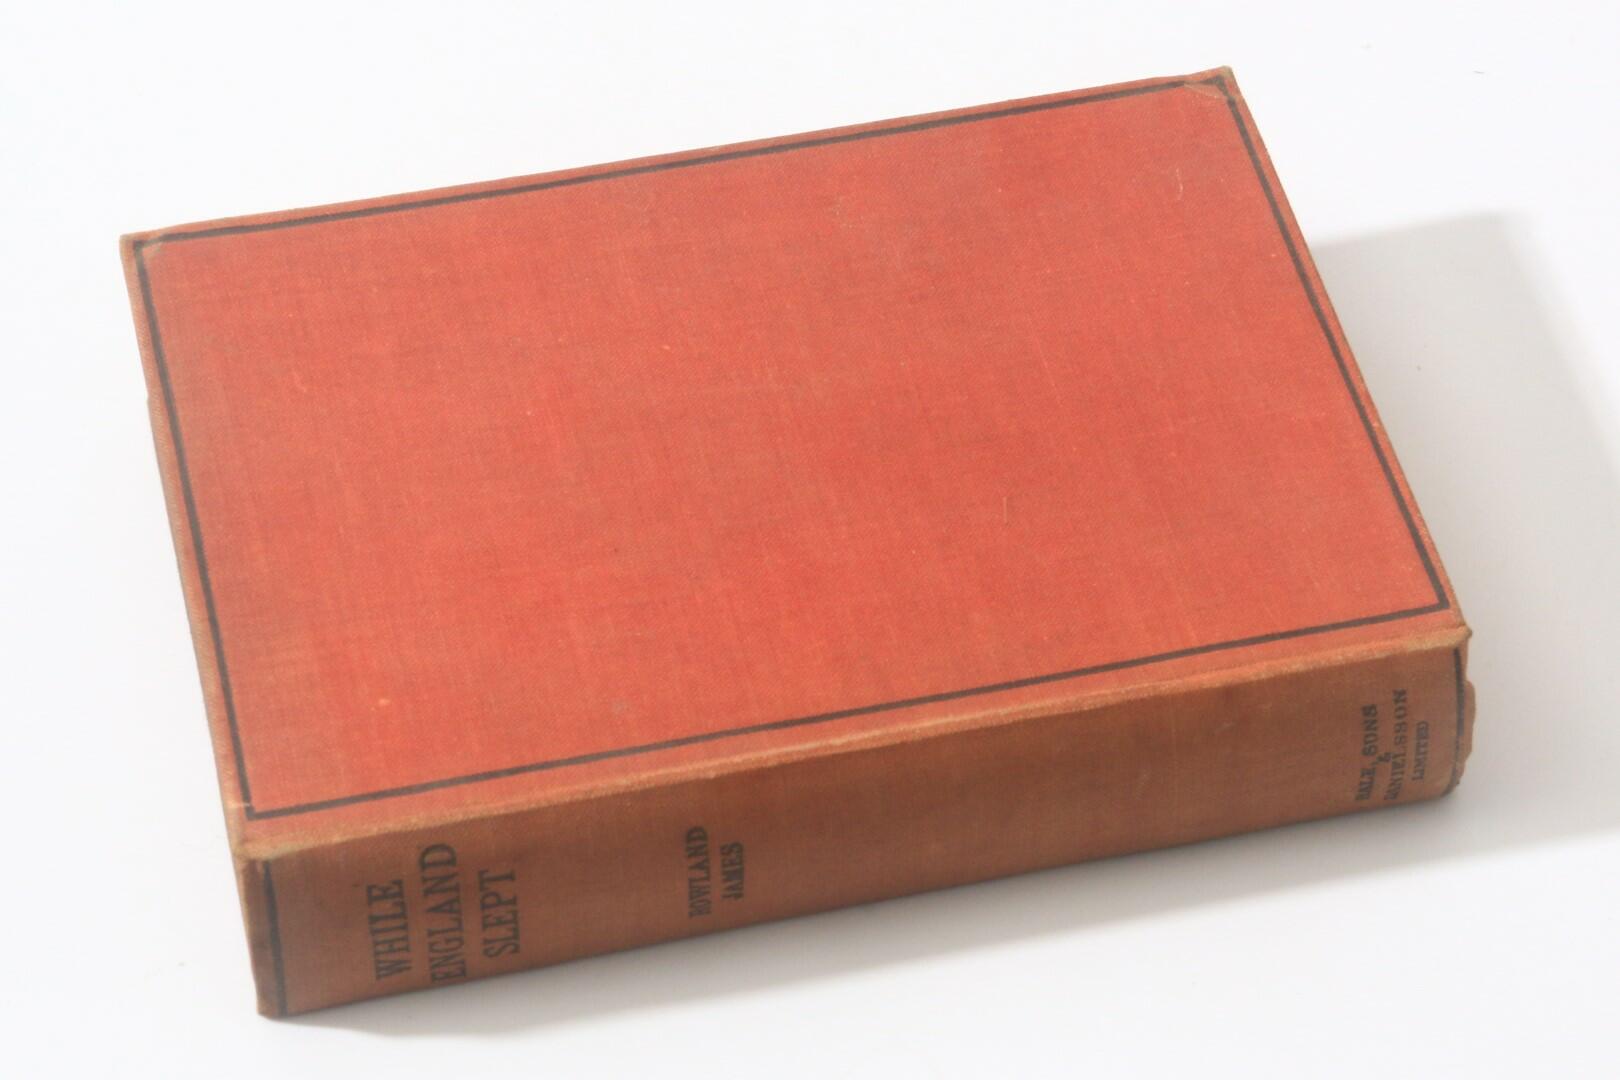 Rowland James - While England Slept - John Bale, Sons and Danielsson, 1932, Signed First Edition.